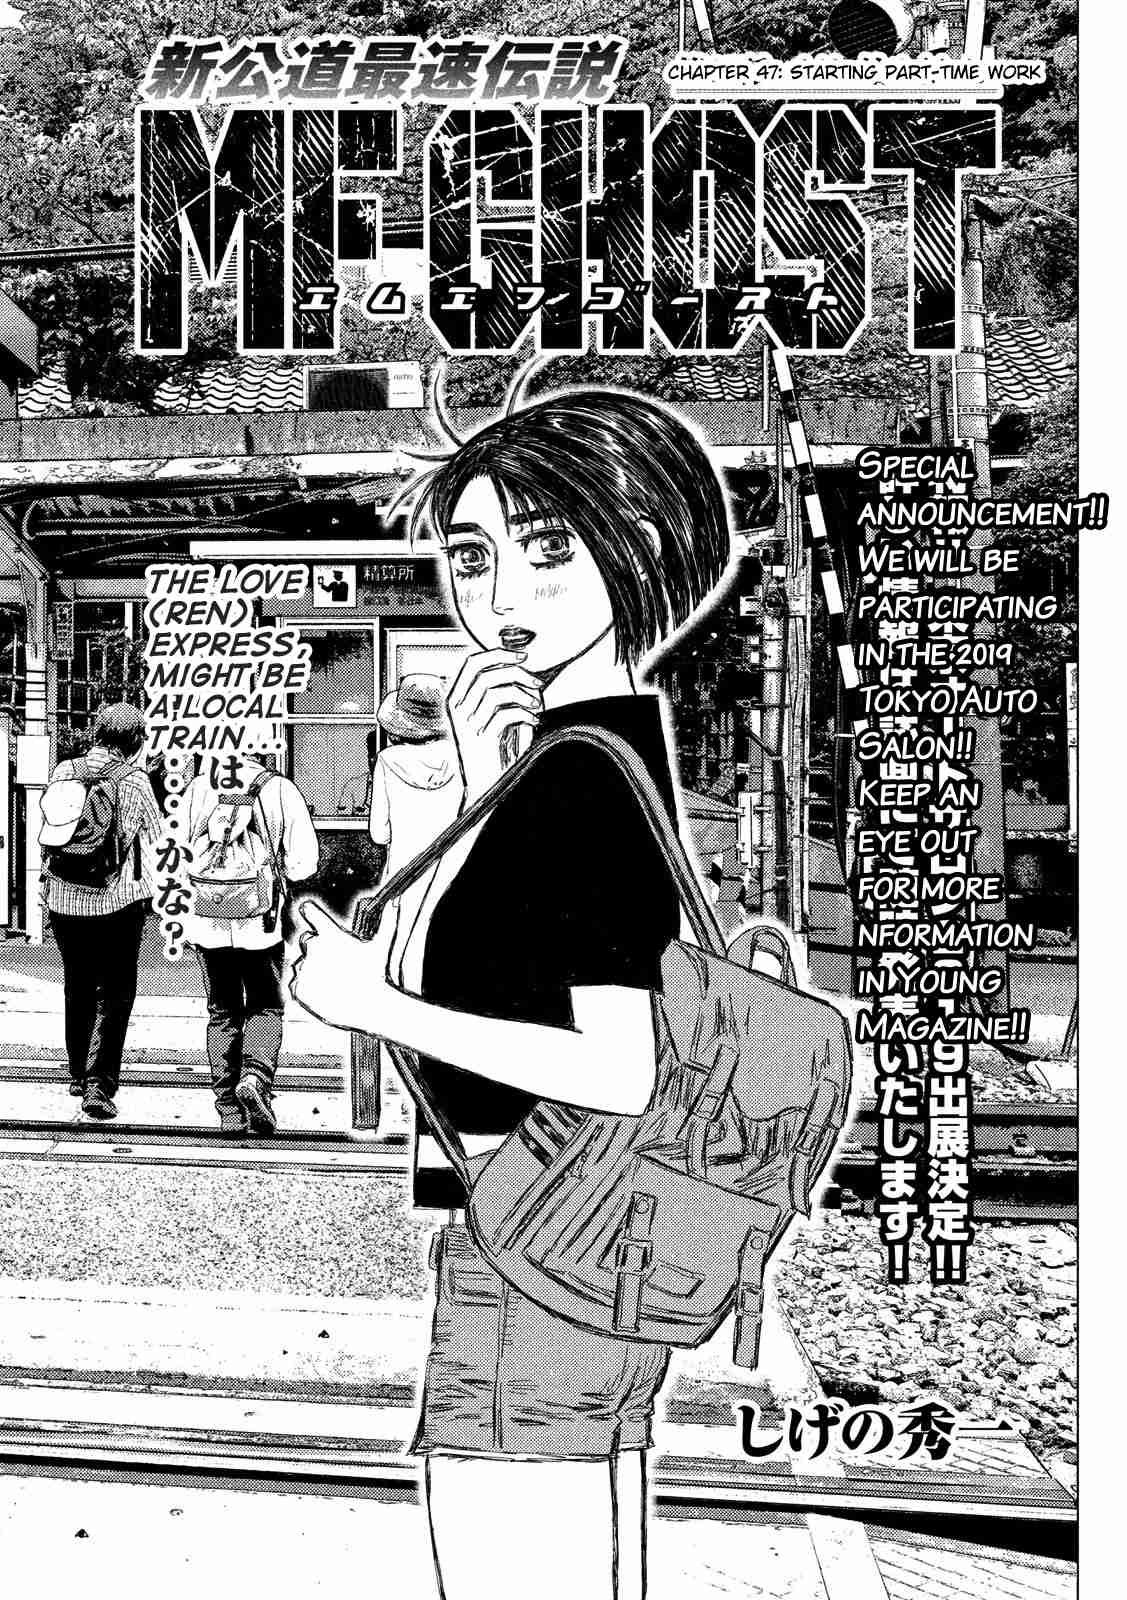 MF Ghost Vol. 4 Ch. 47 Starting Part time Work